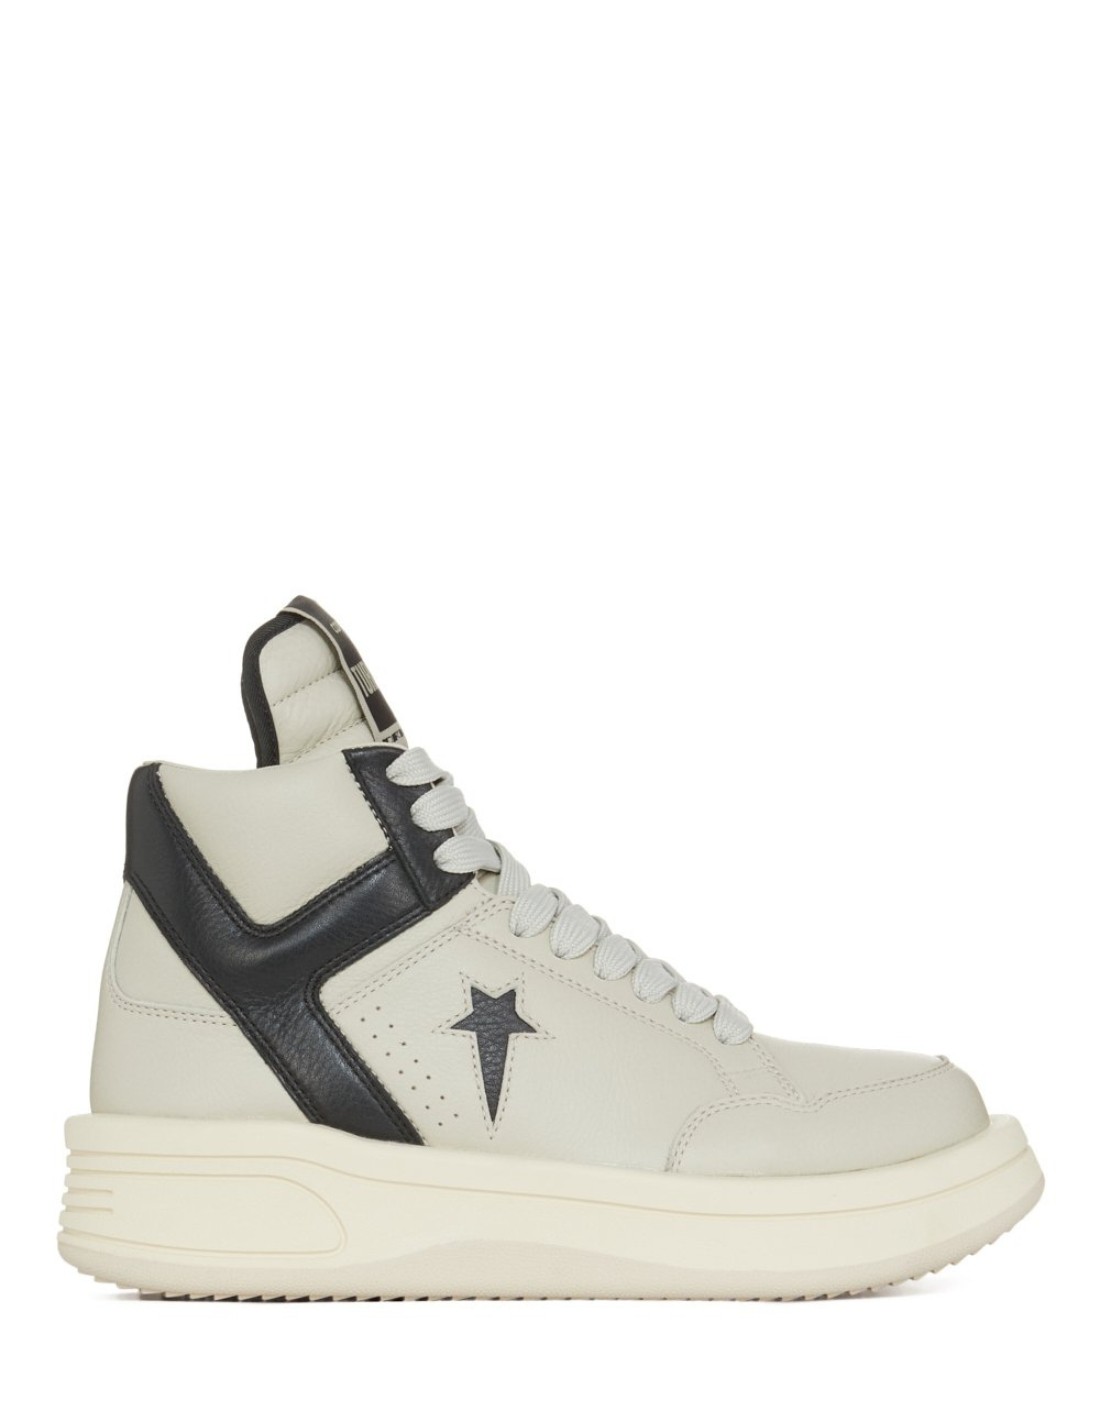 Rick Owens x Converse “Turbowpn” two-tones sneakers